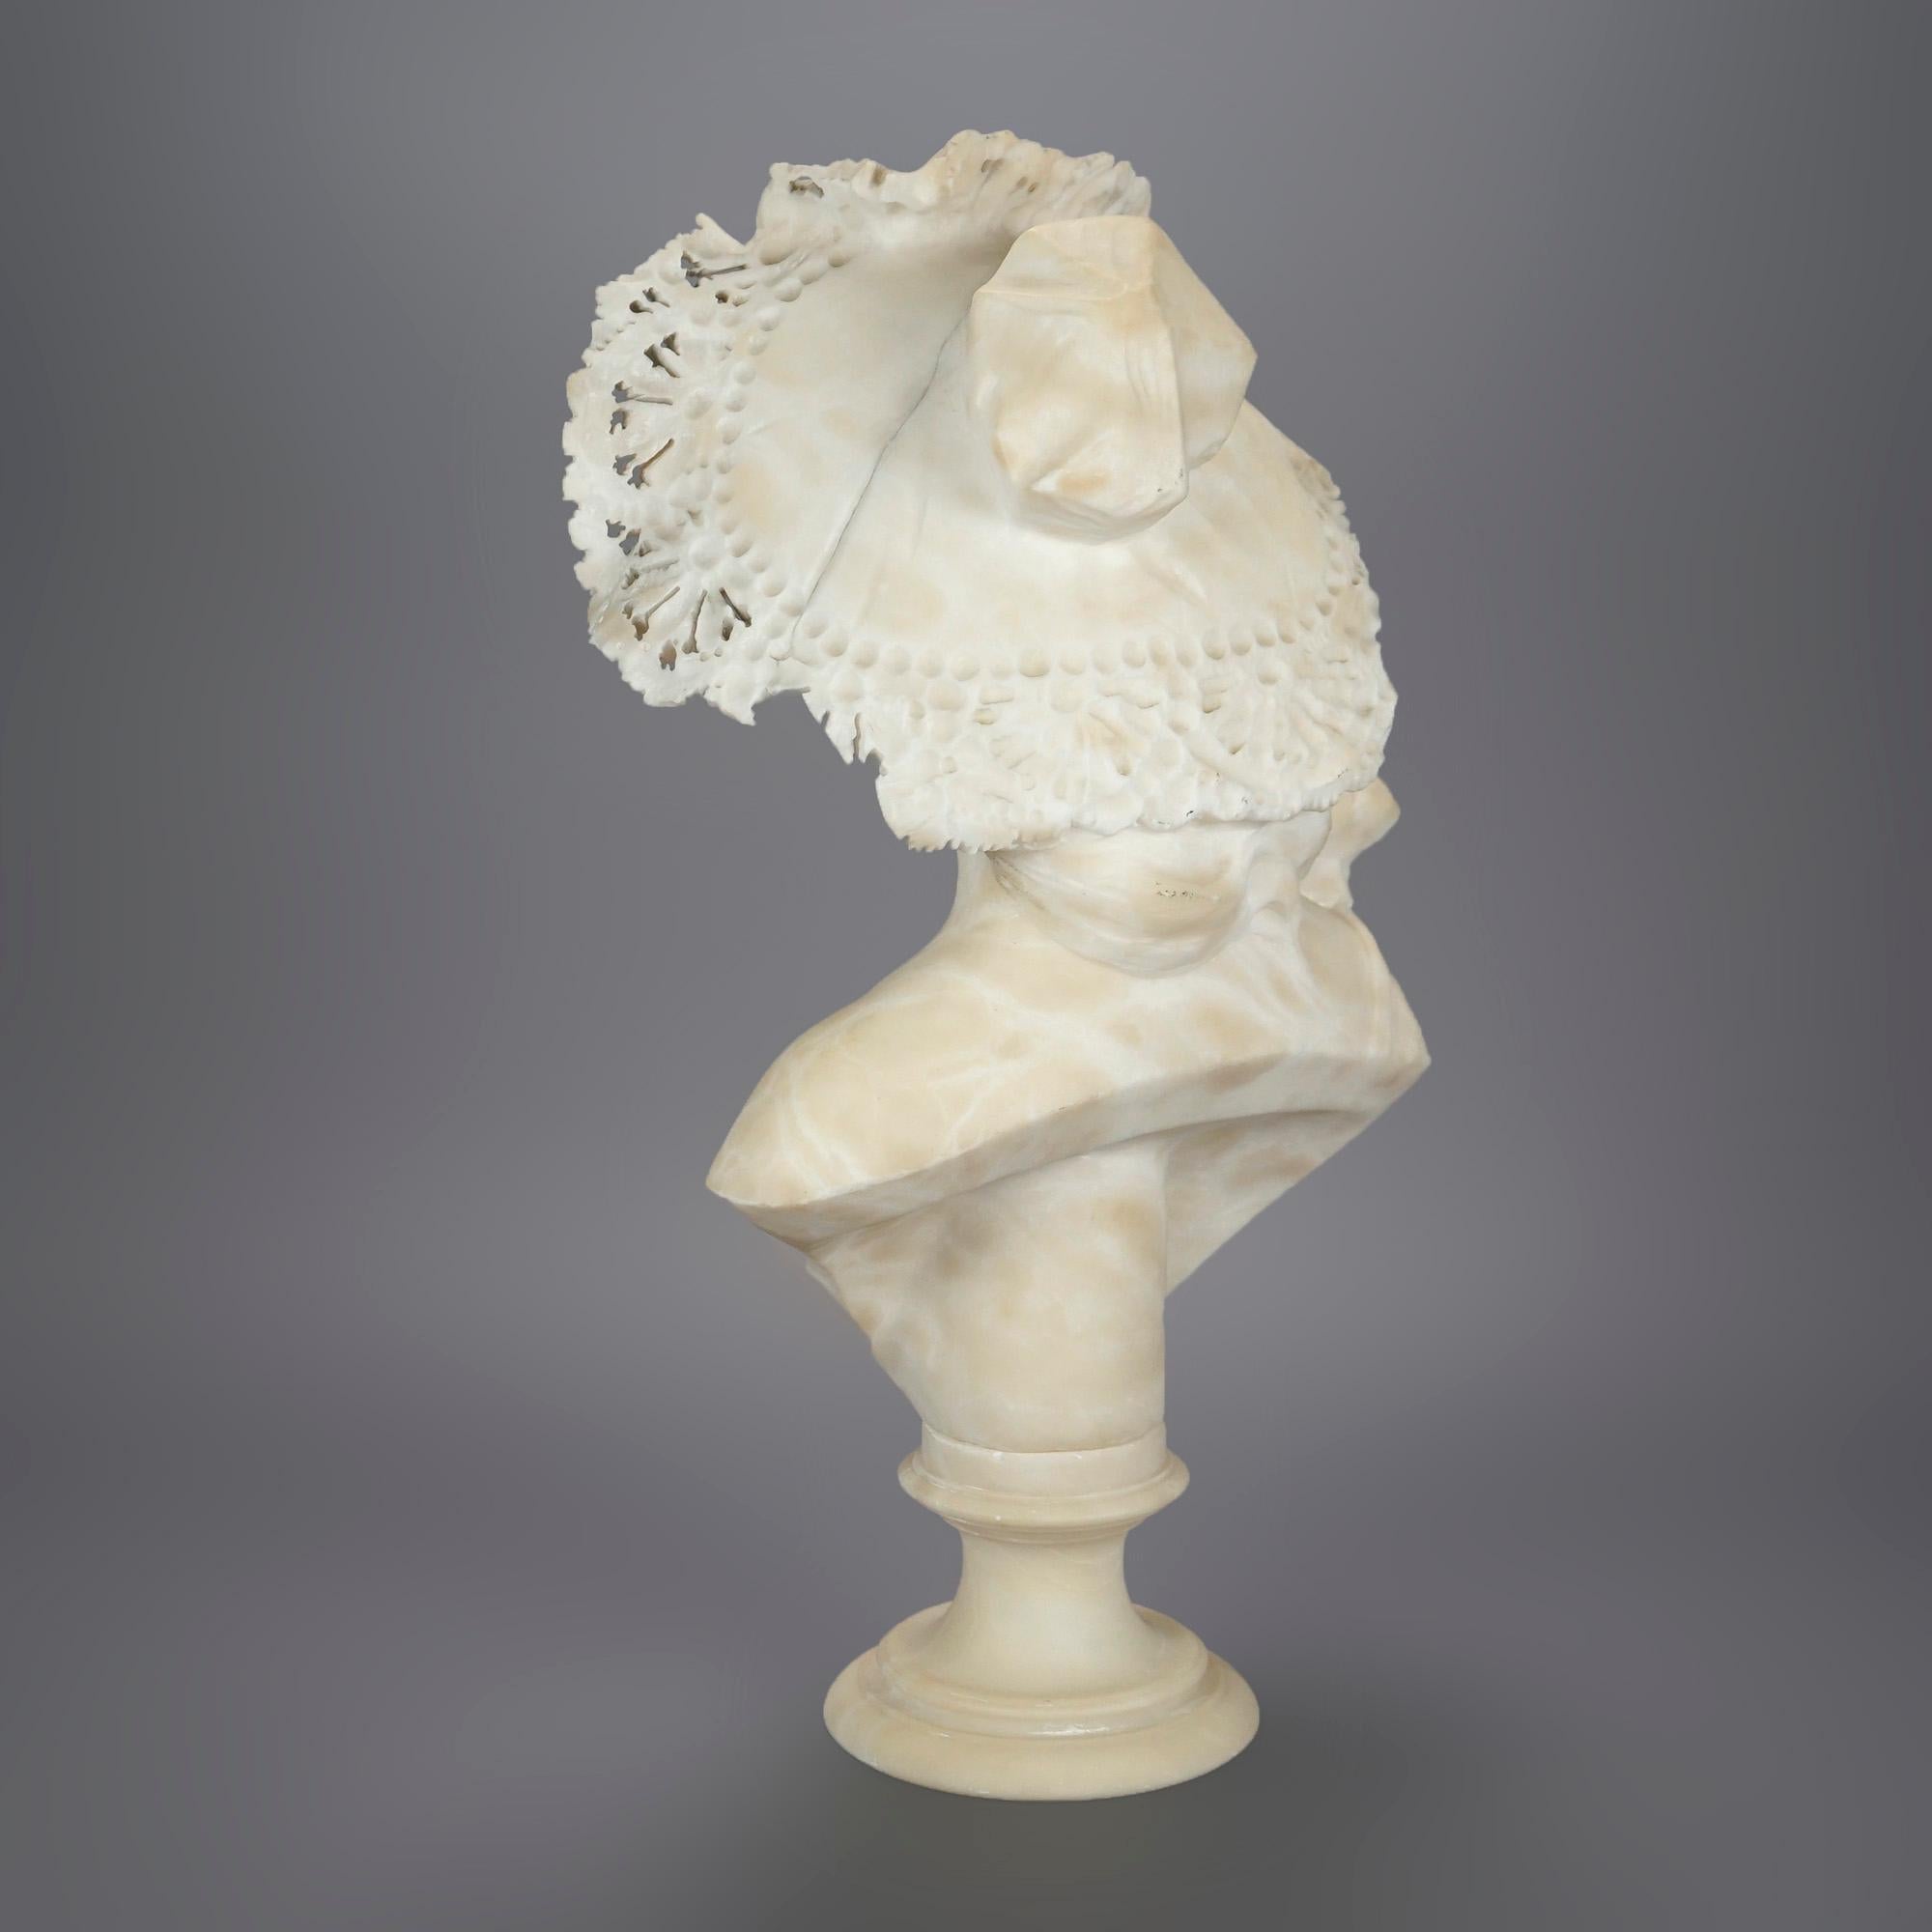 19th Century Antique Alabaster Sculpture of a Woman 19th C